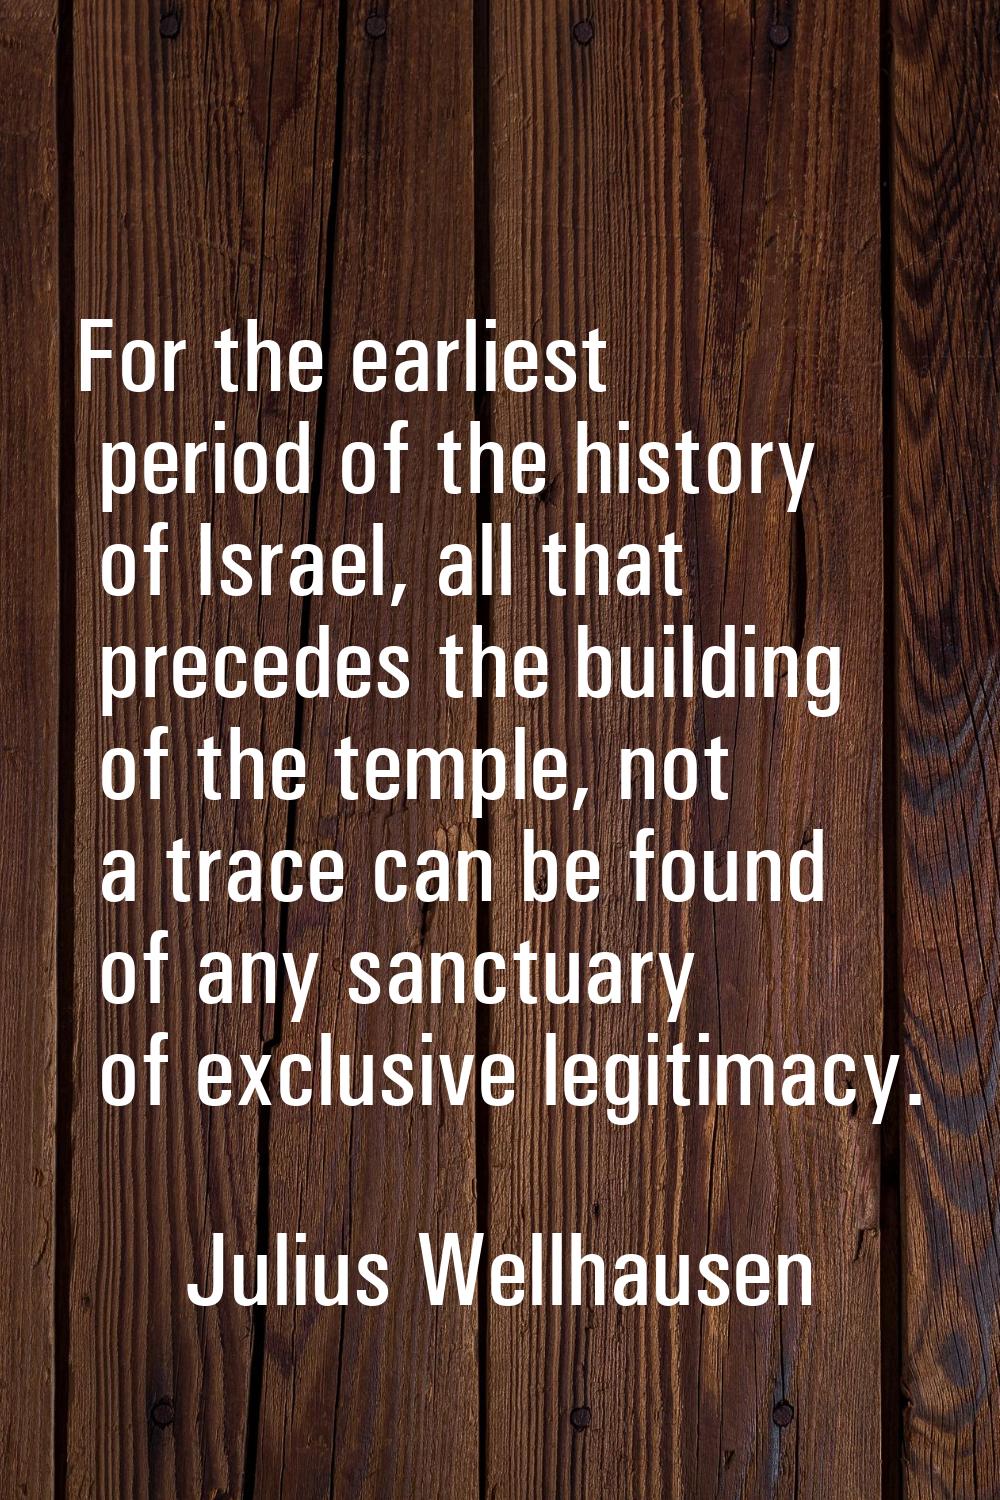 For the earliest period of the history of Israel, all that precedes the building of the temple, not